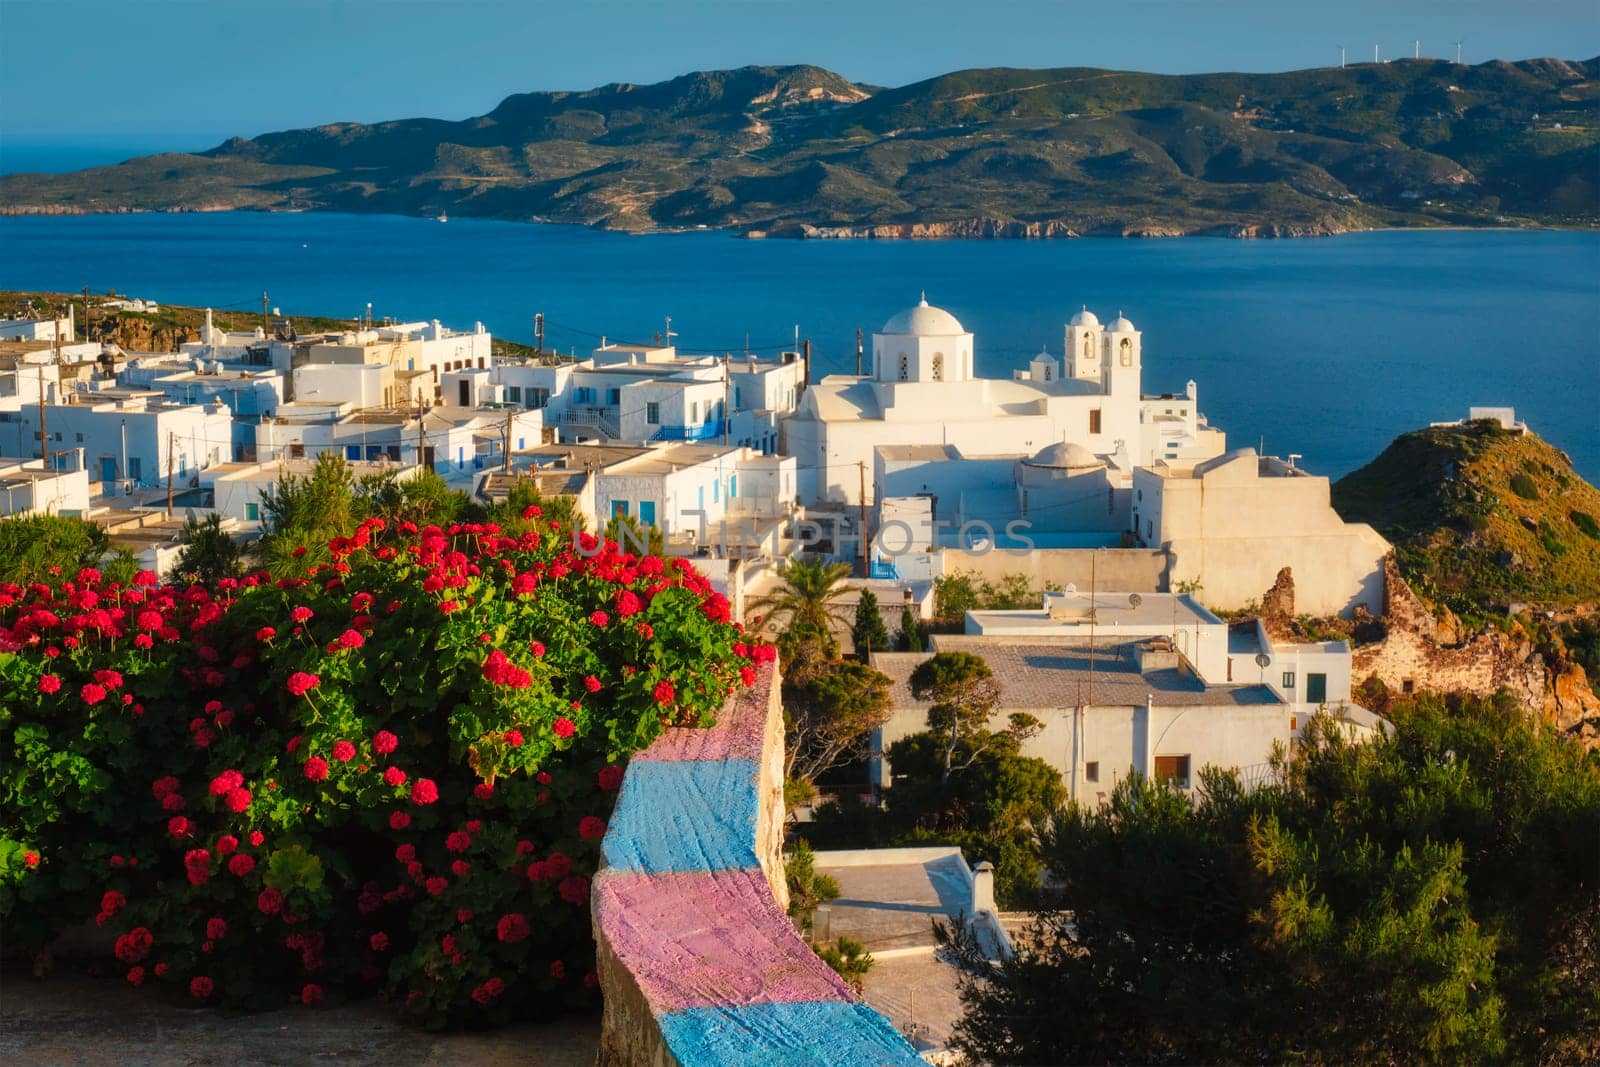 Picturesque scenic view of Greek town Plaka on Milos island over red geranium flowers and Orthodox greek church. Plaka village, Milos island, Greece. Focus on flowers